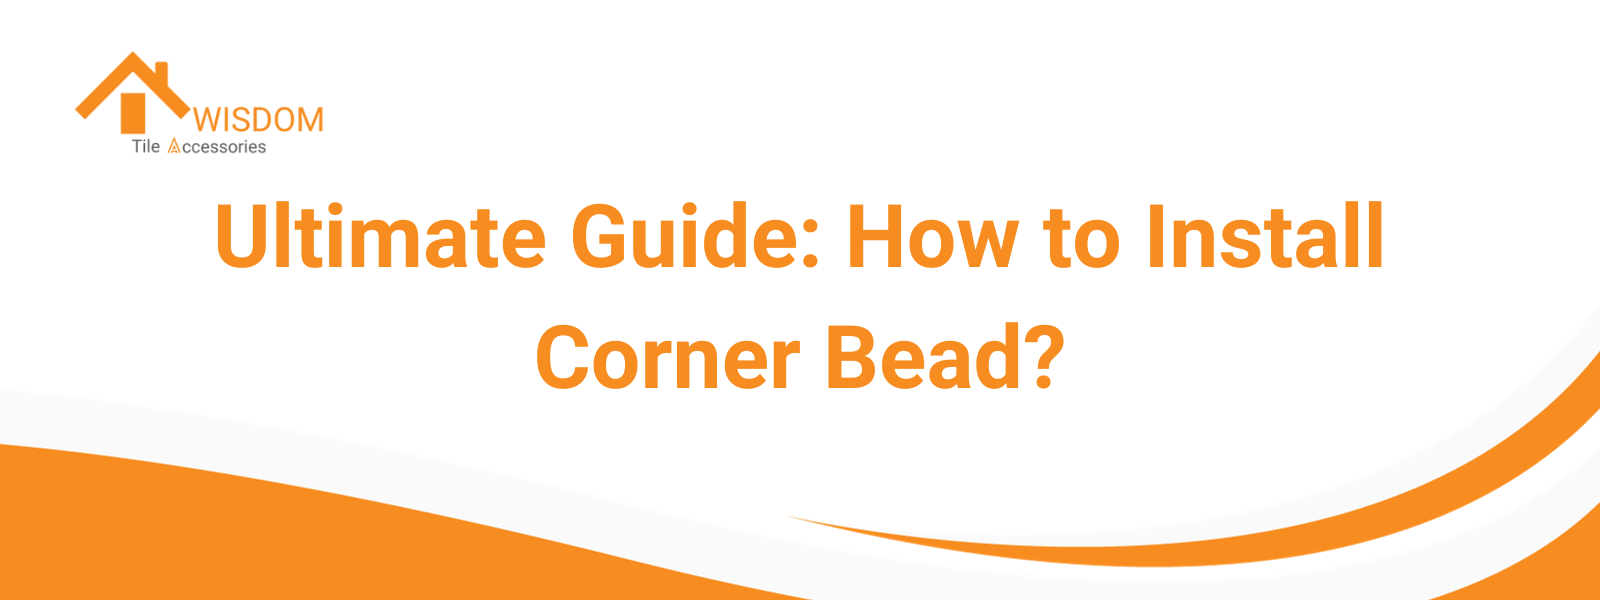 Ultimate Guide: How to Install Corner Bead?